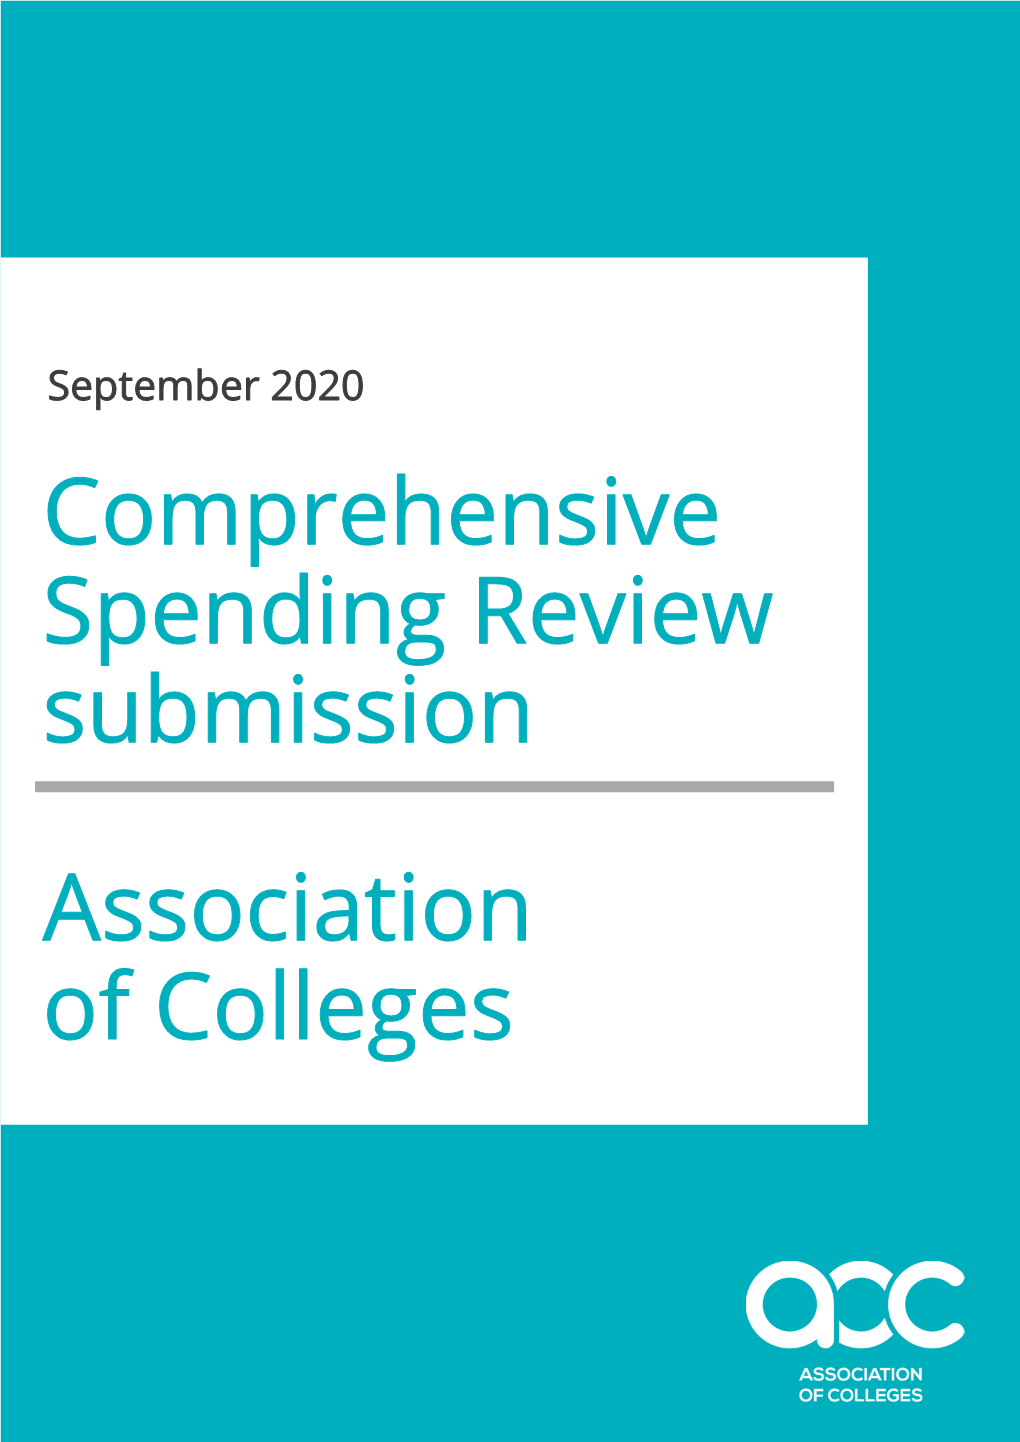 Colleges & the Comprehensive Spending Review